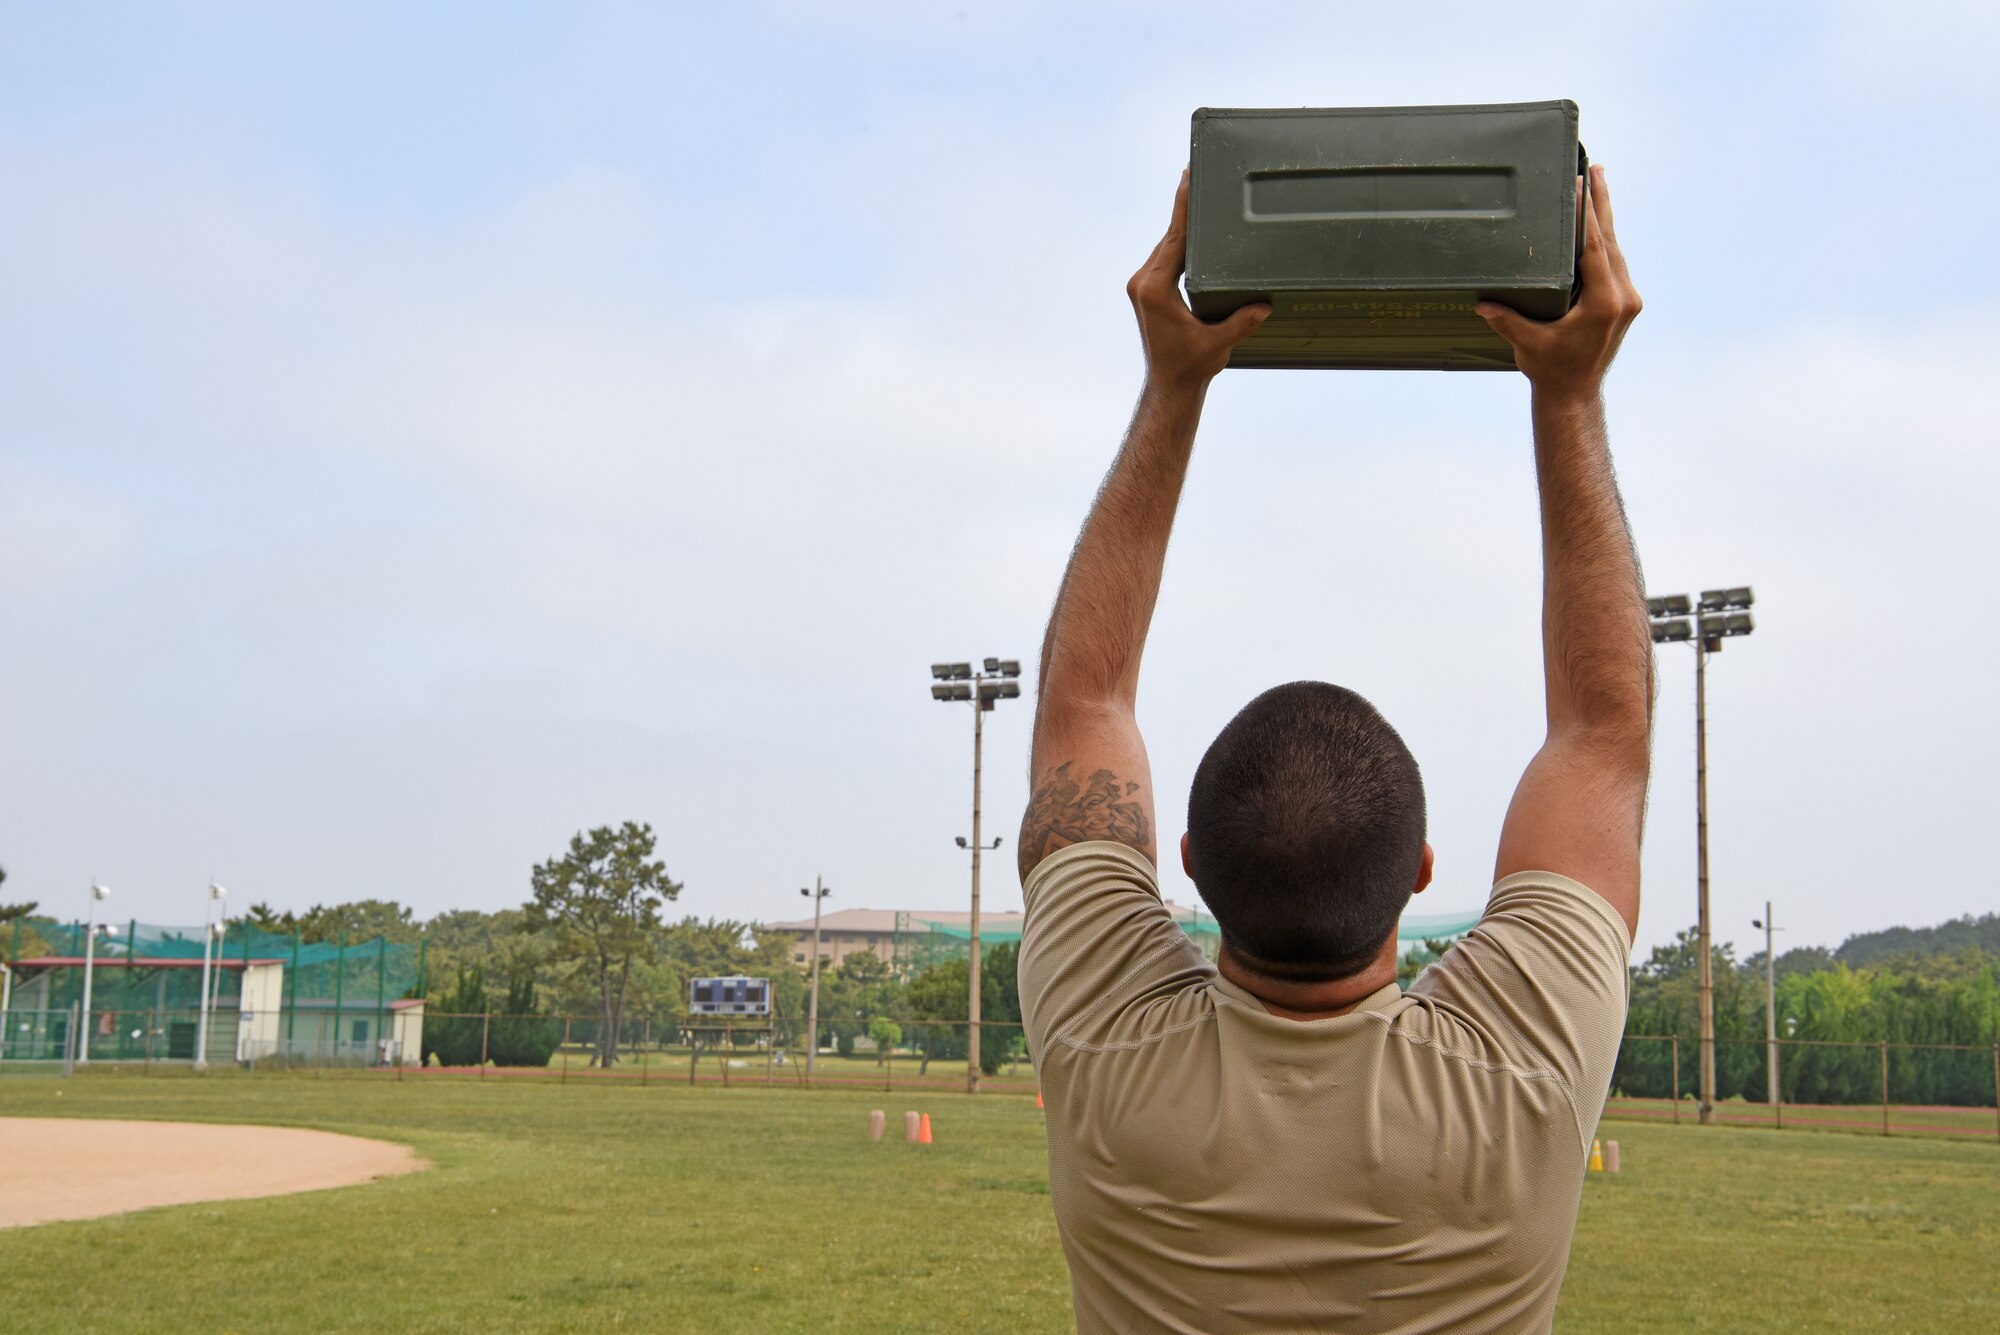 Staff Sgt. Richard Gardner, 8th Security Forces Squadron 2019 Advanced Combat Skills Assessment team member, lifts an ammo can during physical training at Kunsan Air Base, Republic of Korea, June 5, 2019. Team Kunsan not only brought home the top team trophy, they also placed first in three of the five events, including the mental and physical challenge, combat weapons and the combat fitness challenge. (U.S. Air Force photo by Staff Sgt. Mackenzie Mendez)